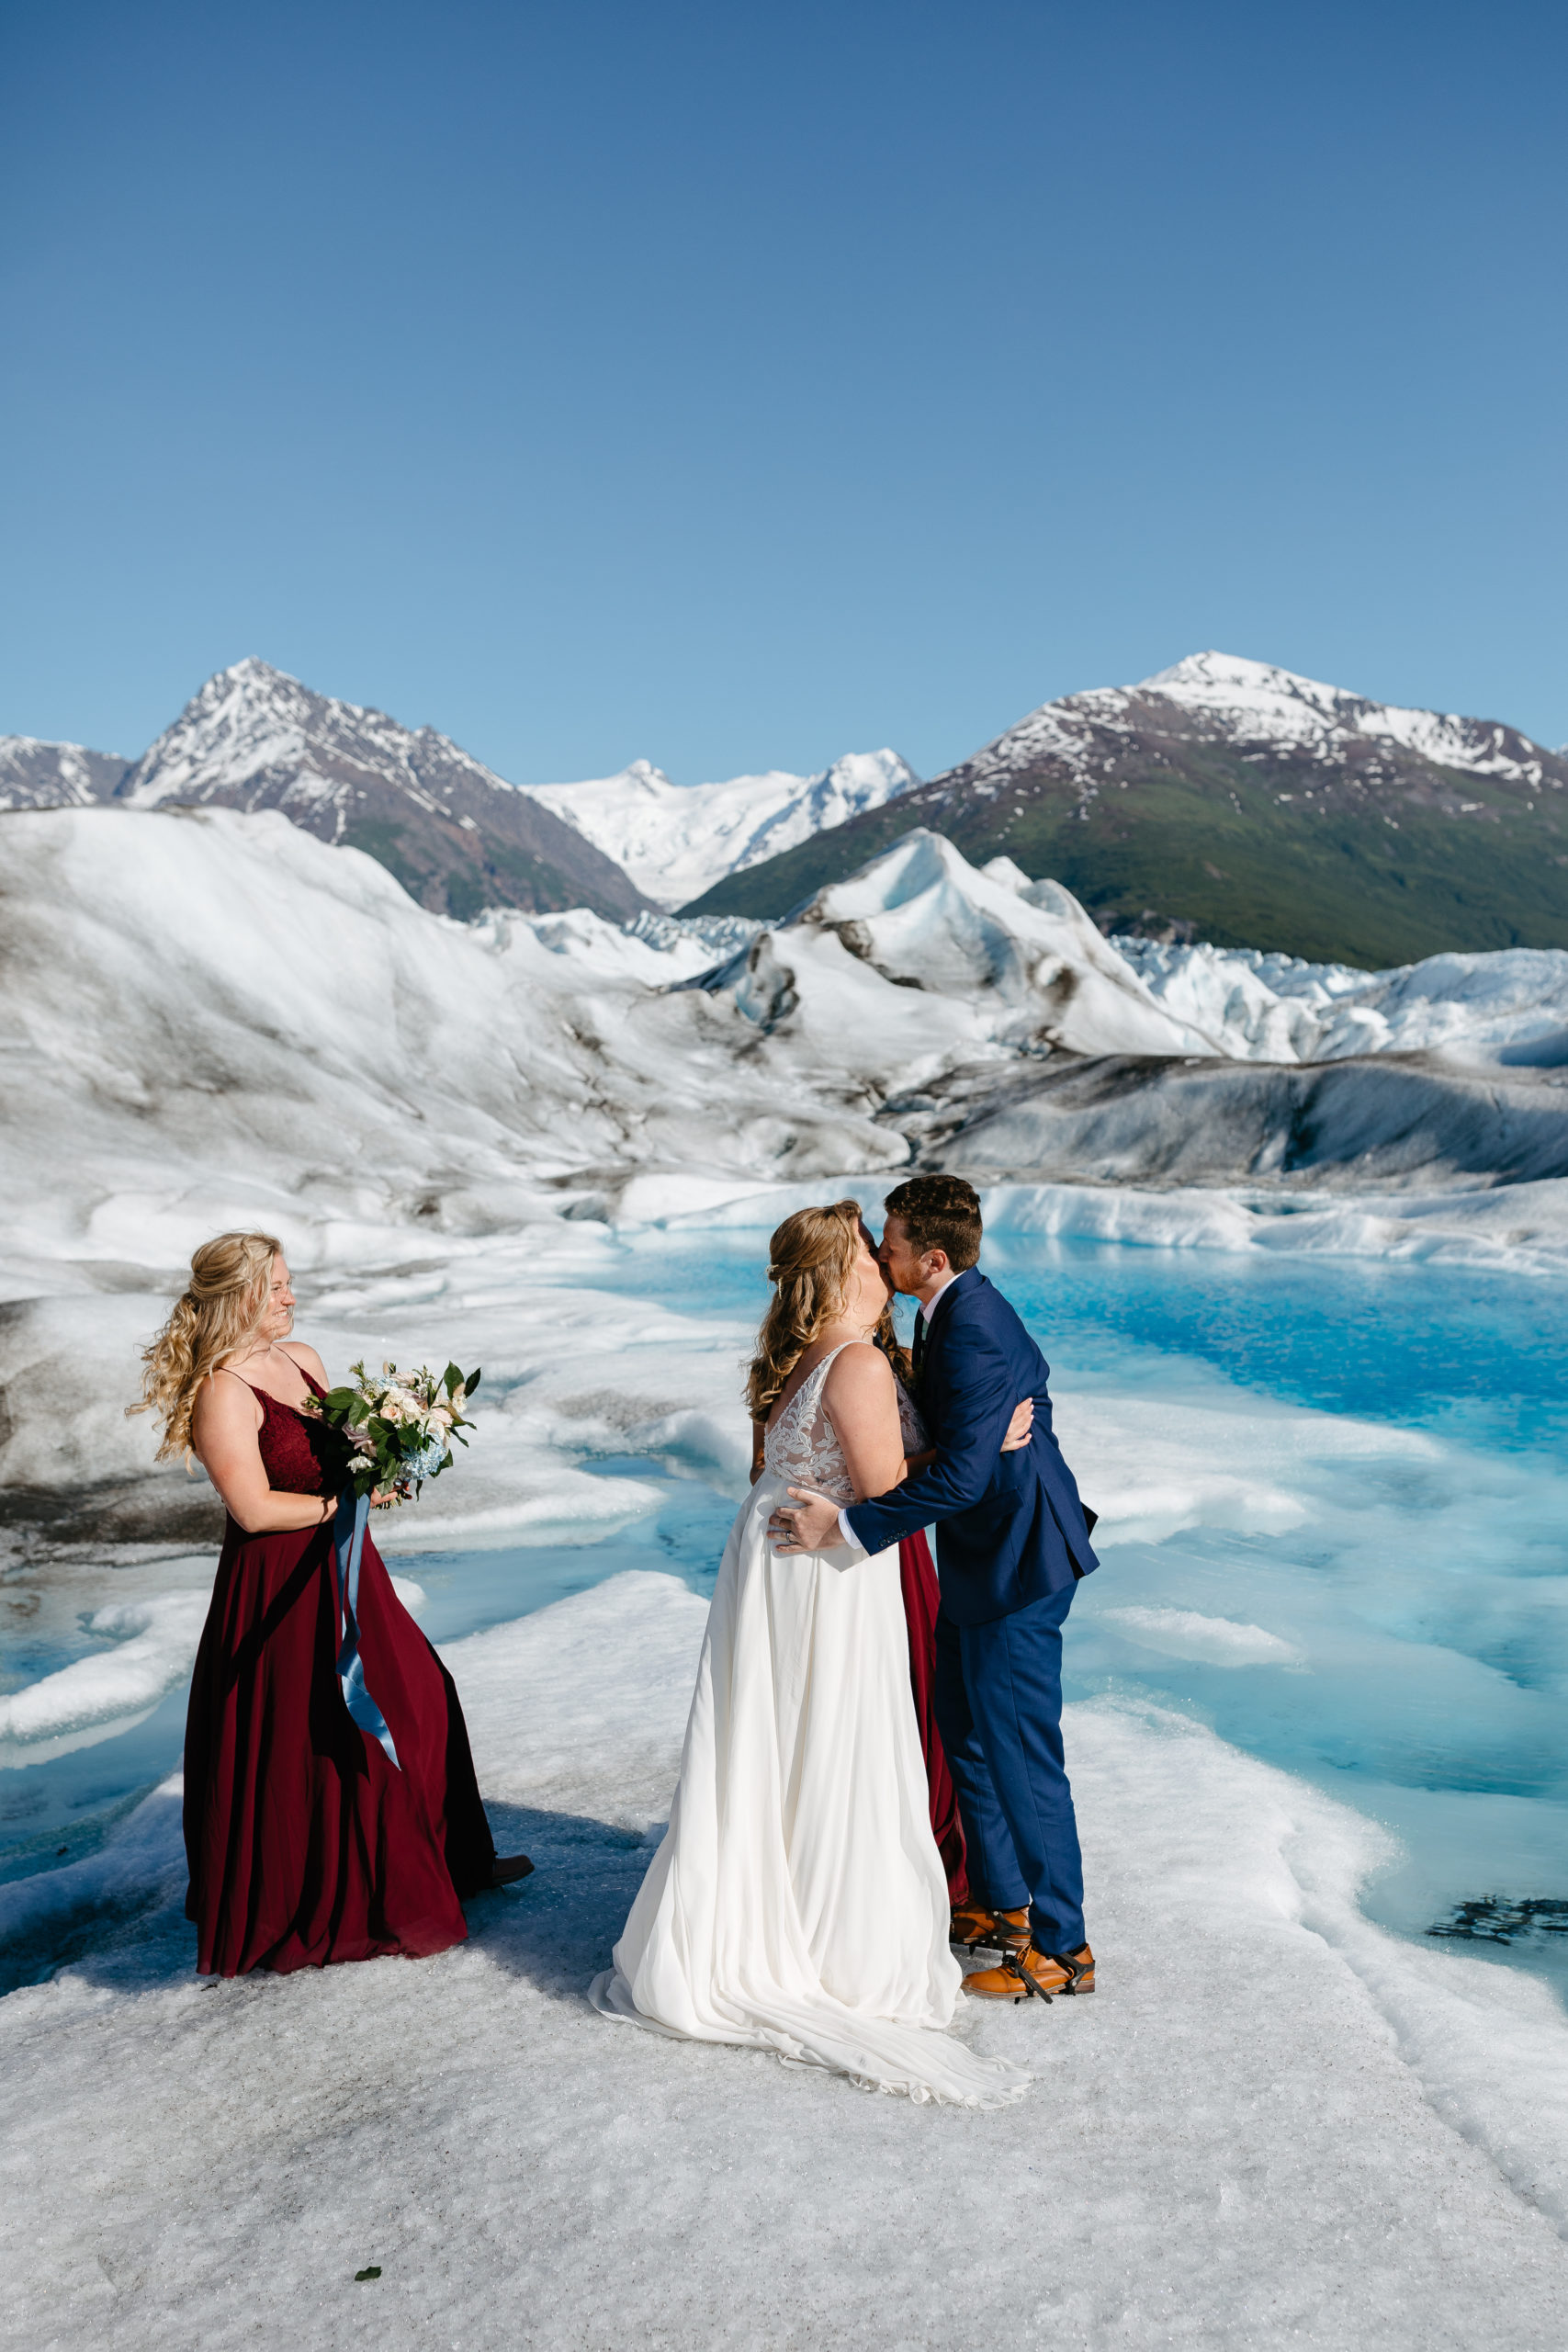 Bride and Groom's First Kiss during Alaskan Glacier Ceremony 